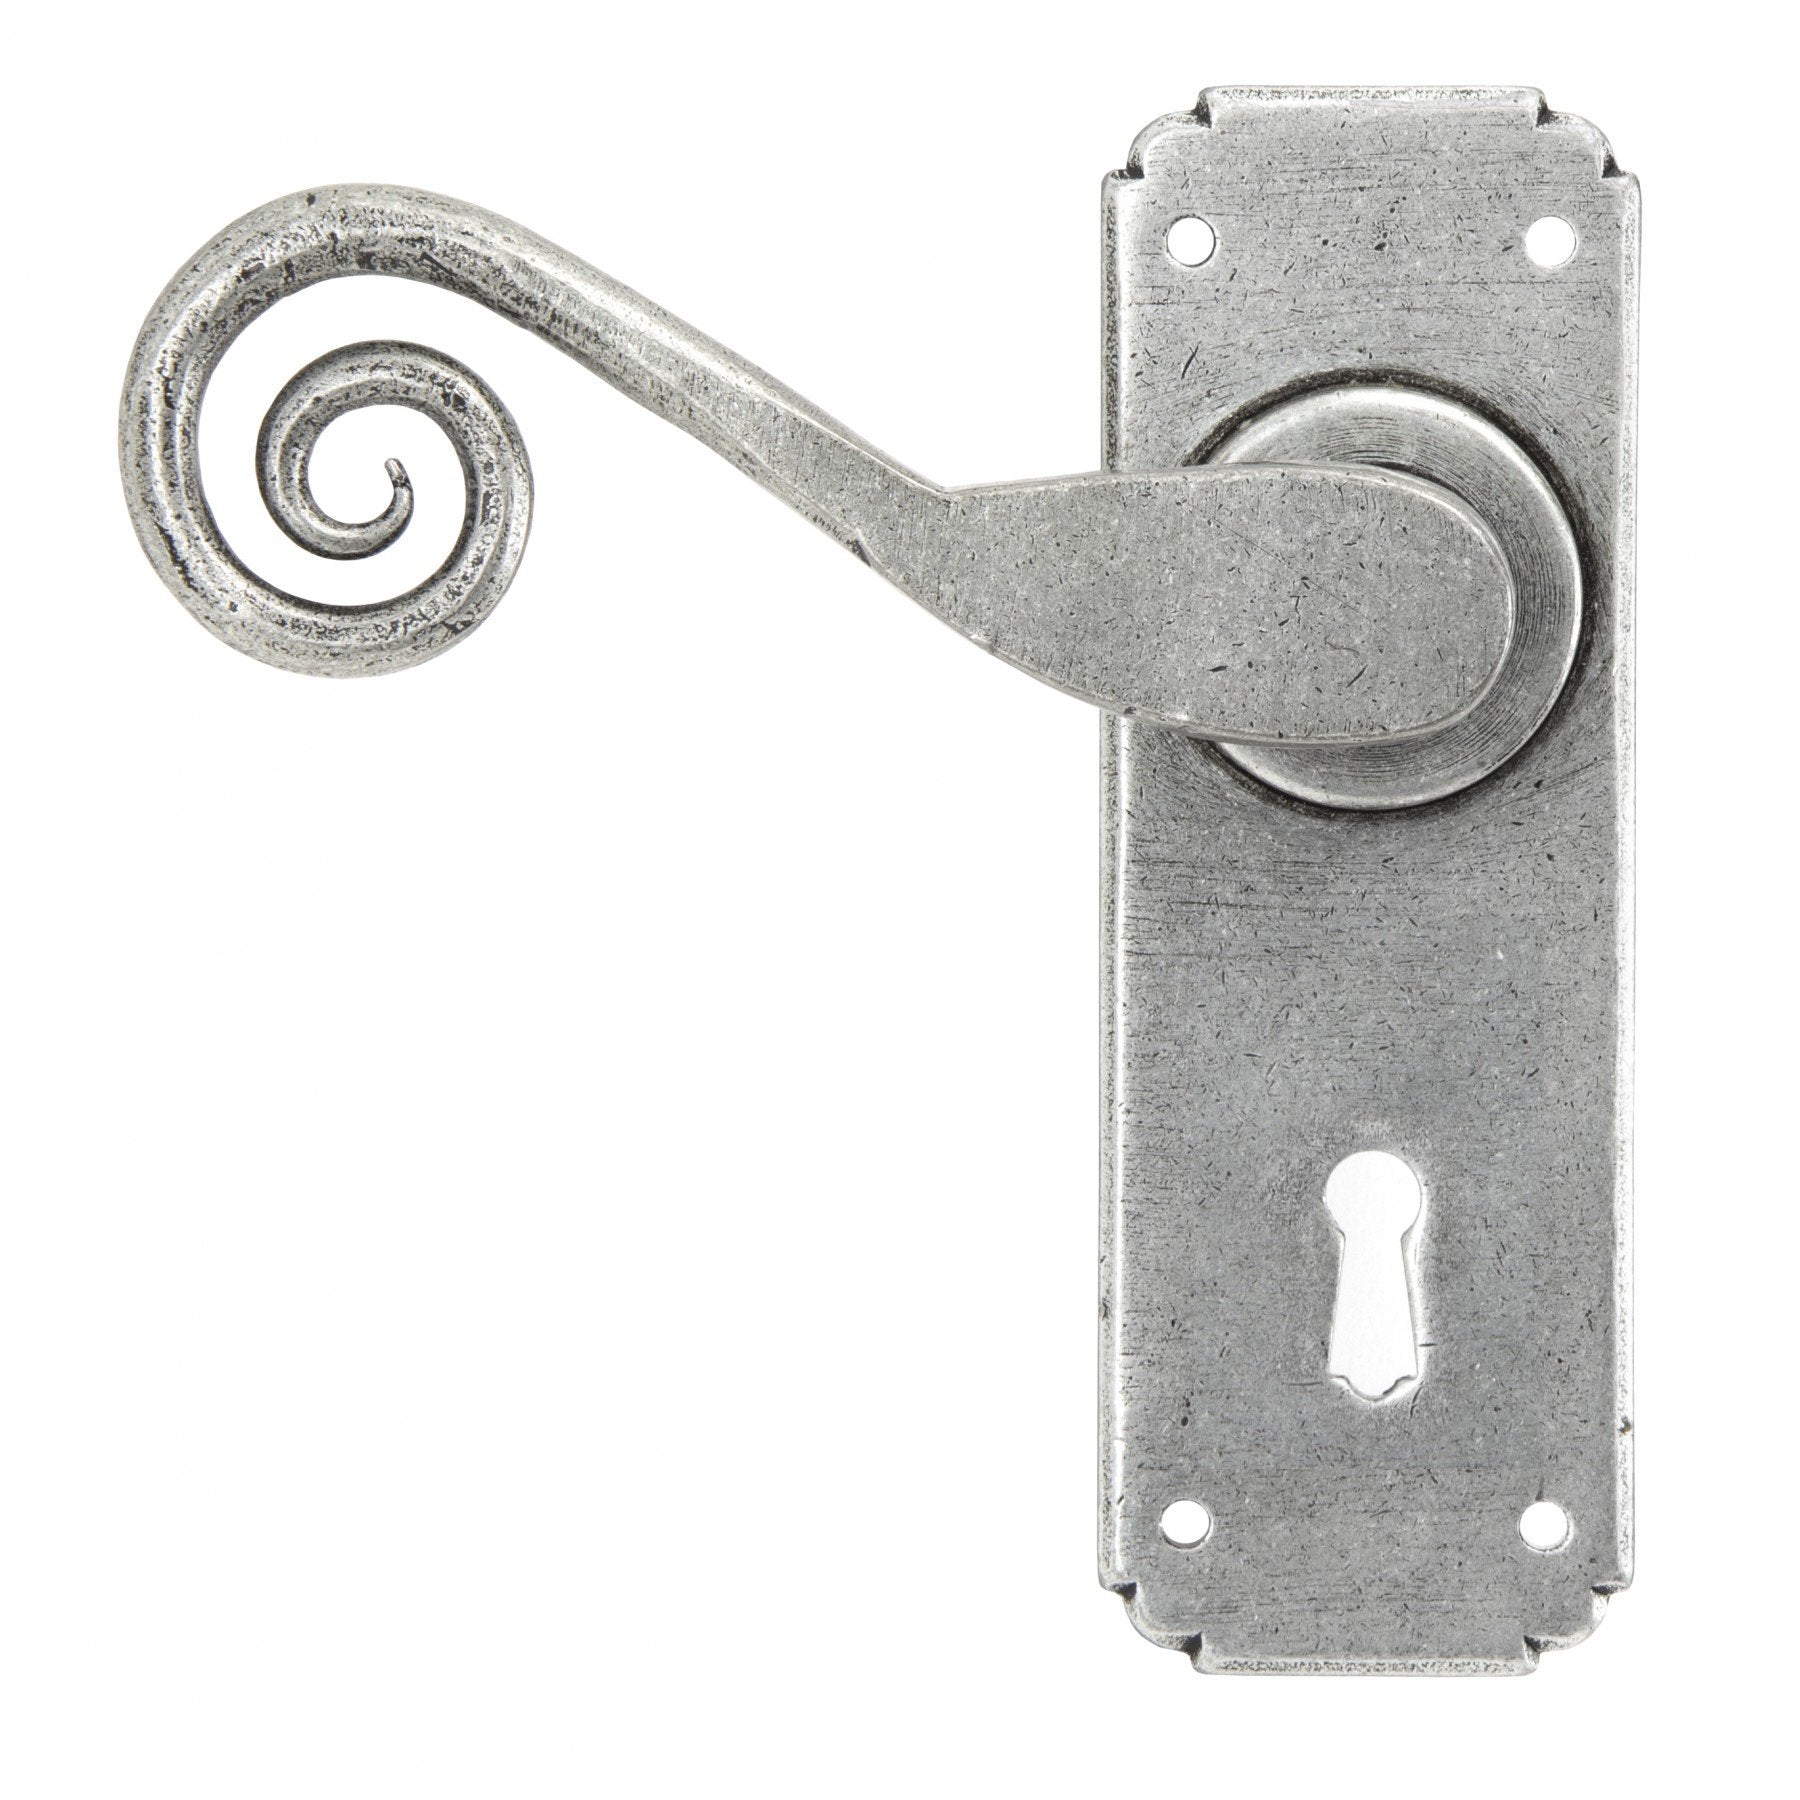 From the Anvil Pewter Monkeytail Sprung Lever Lock Set